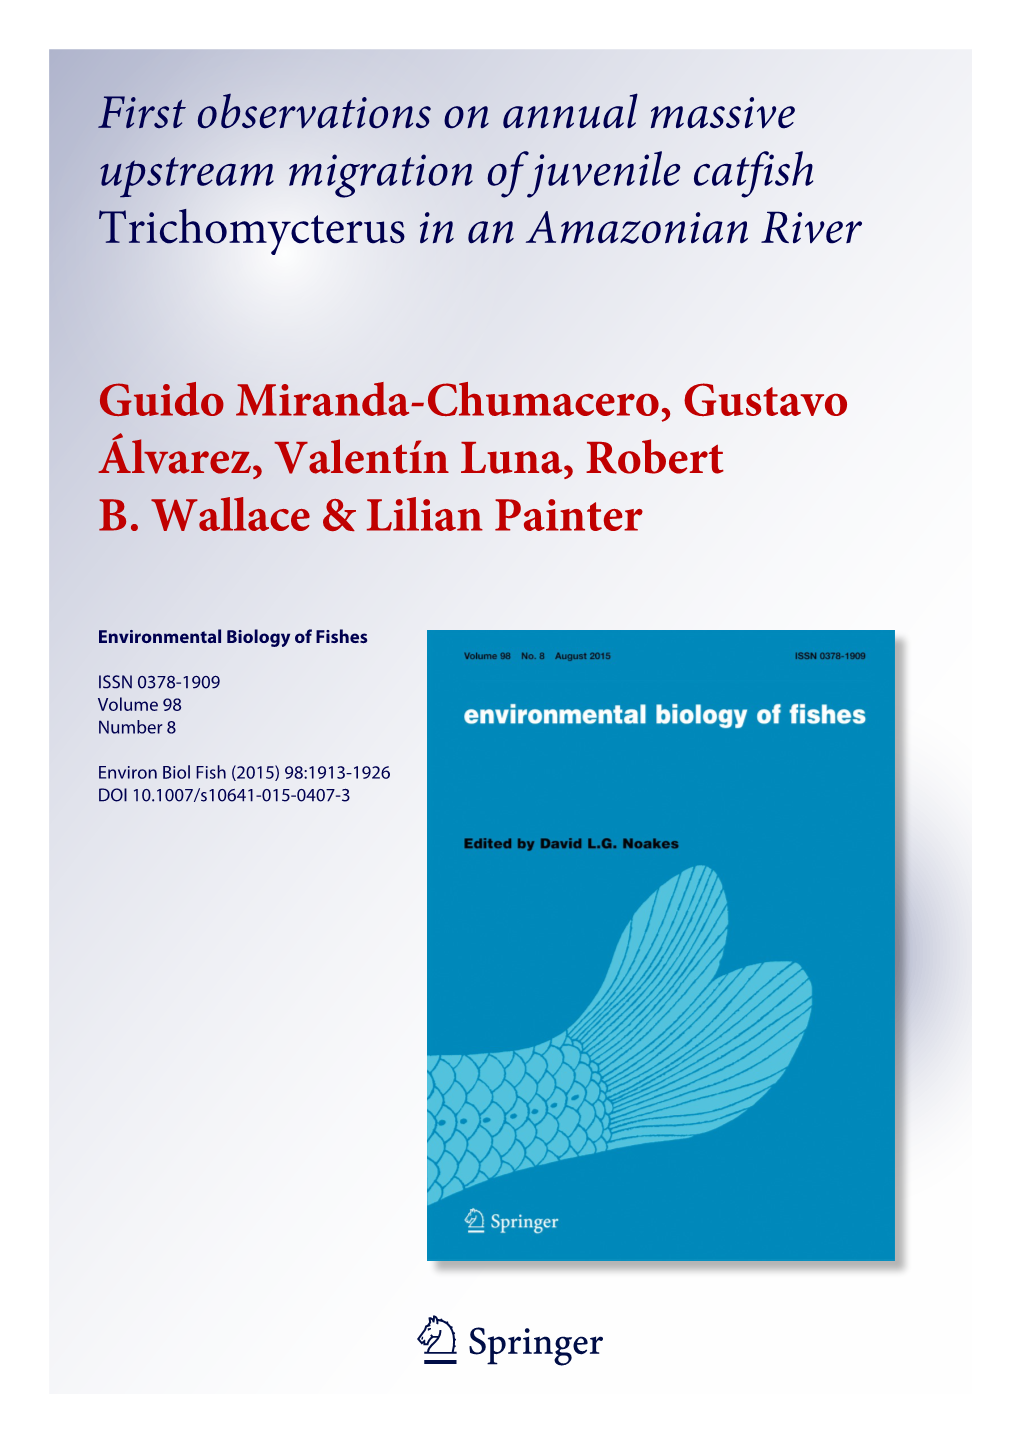 First Observations on Annual Massive Upstream Migration of Juvenile Catfish Trichomycterus in an Amazonian River